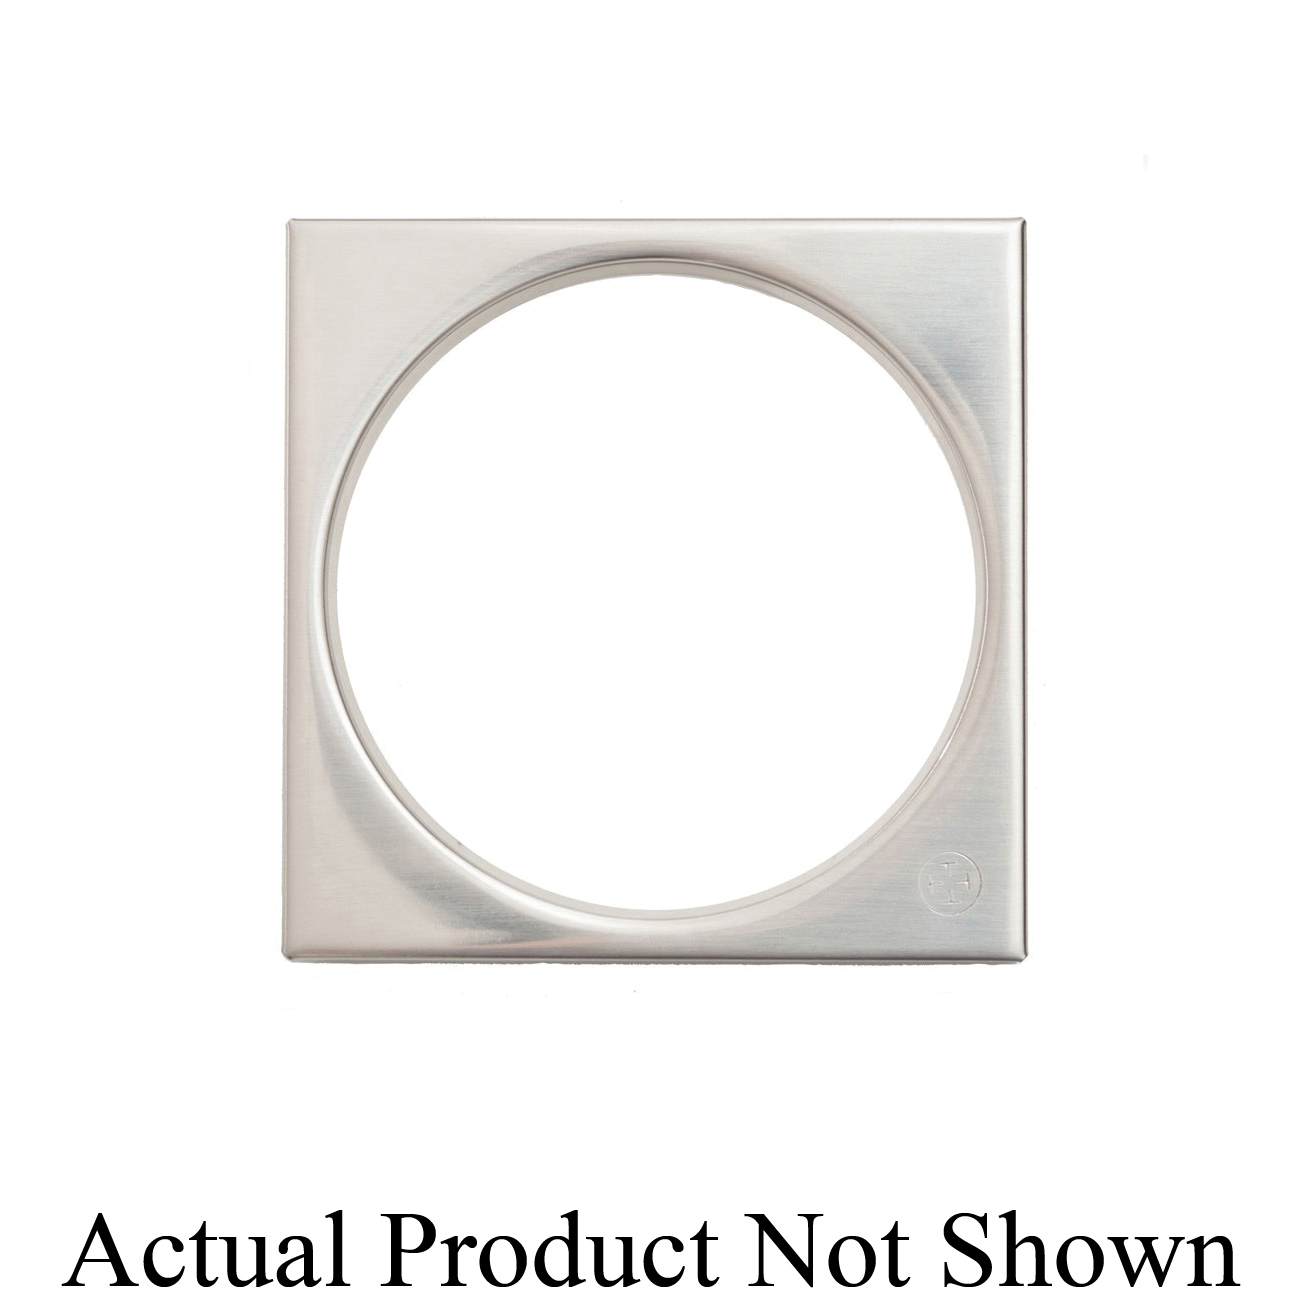 Trim To The Trade 4T-040-50 Tile Square, For Use With Plumbing Product Drains, Brushed Nickel/Stainless